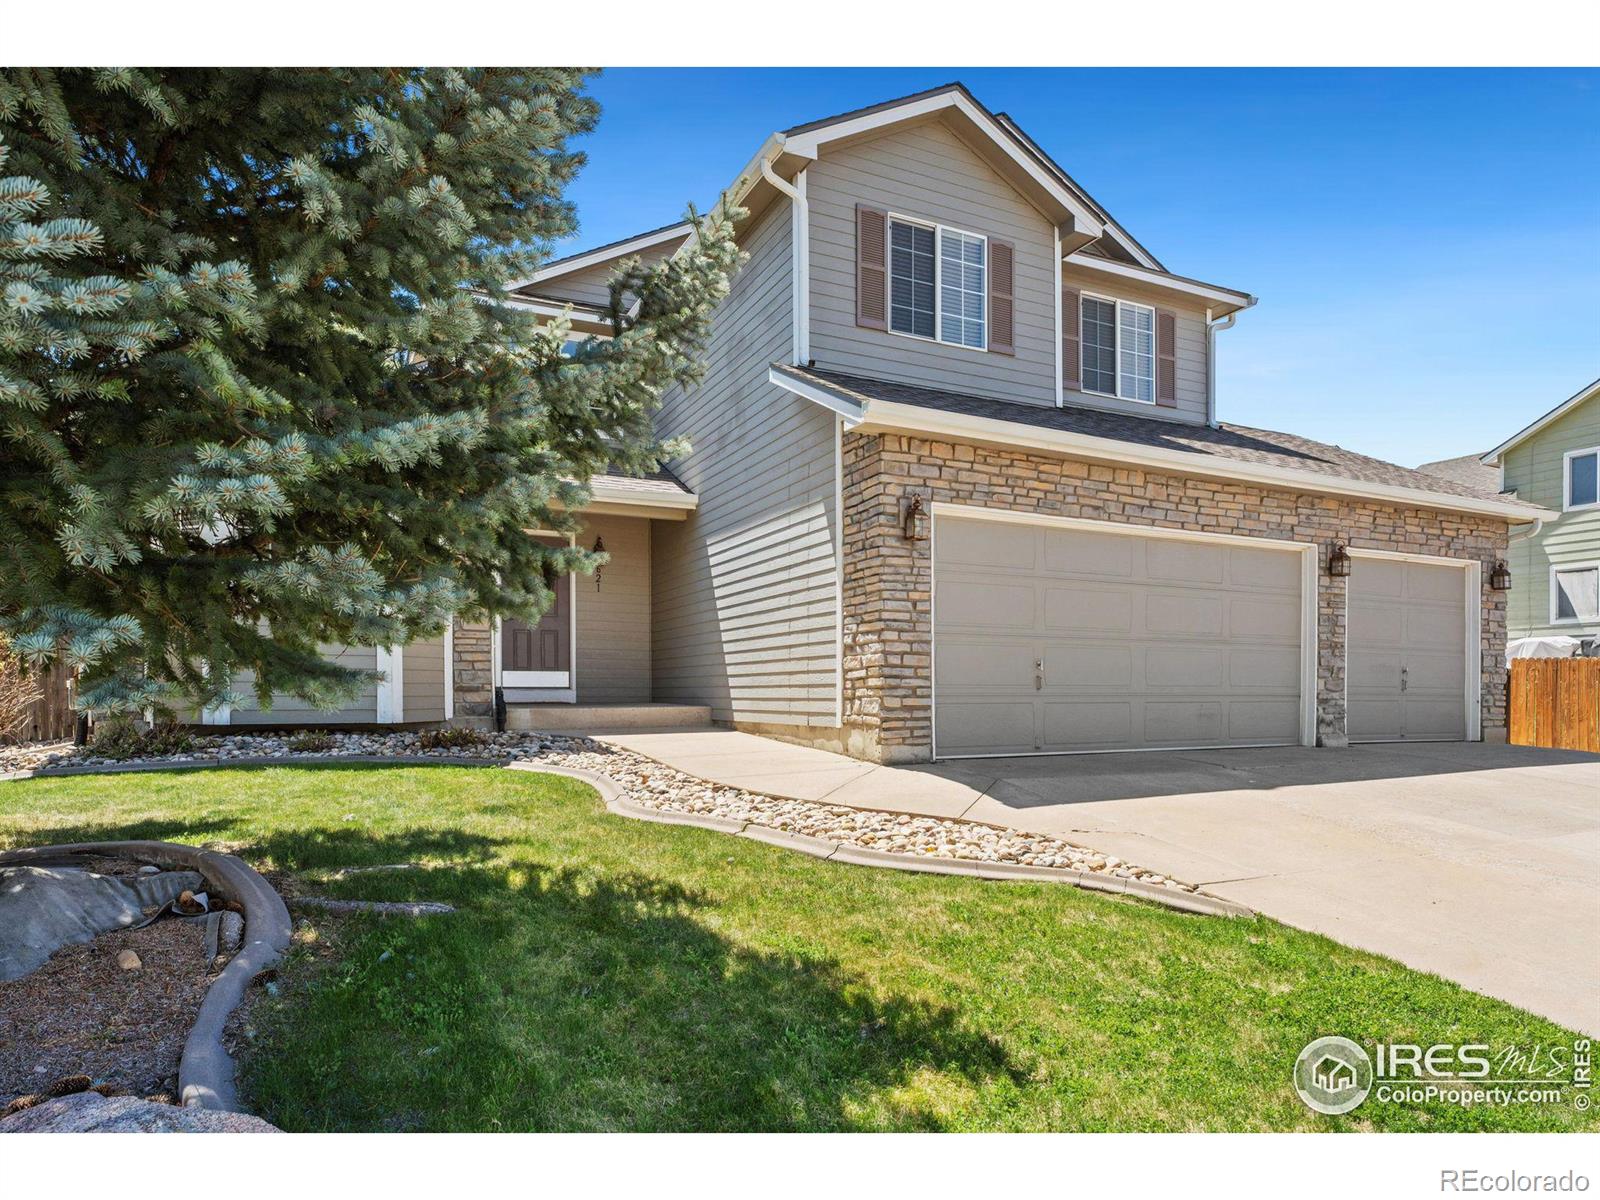 Report Image for 621  Jansen Drive,Fort Collins, Colorado